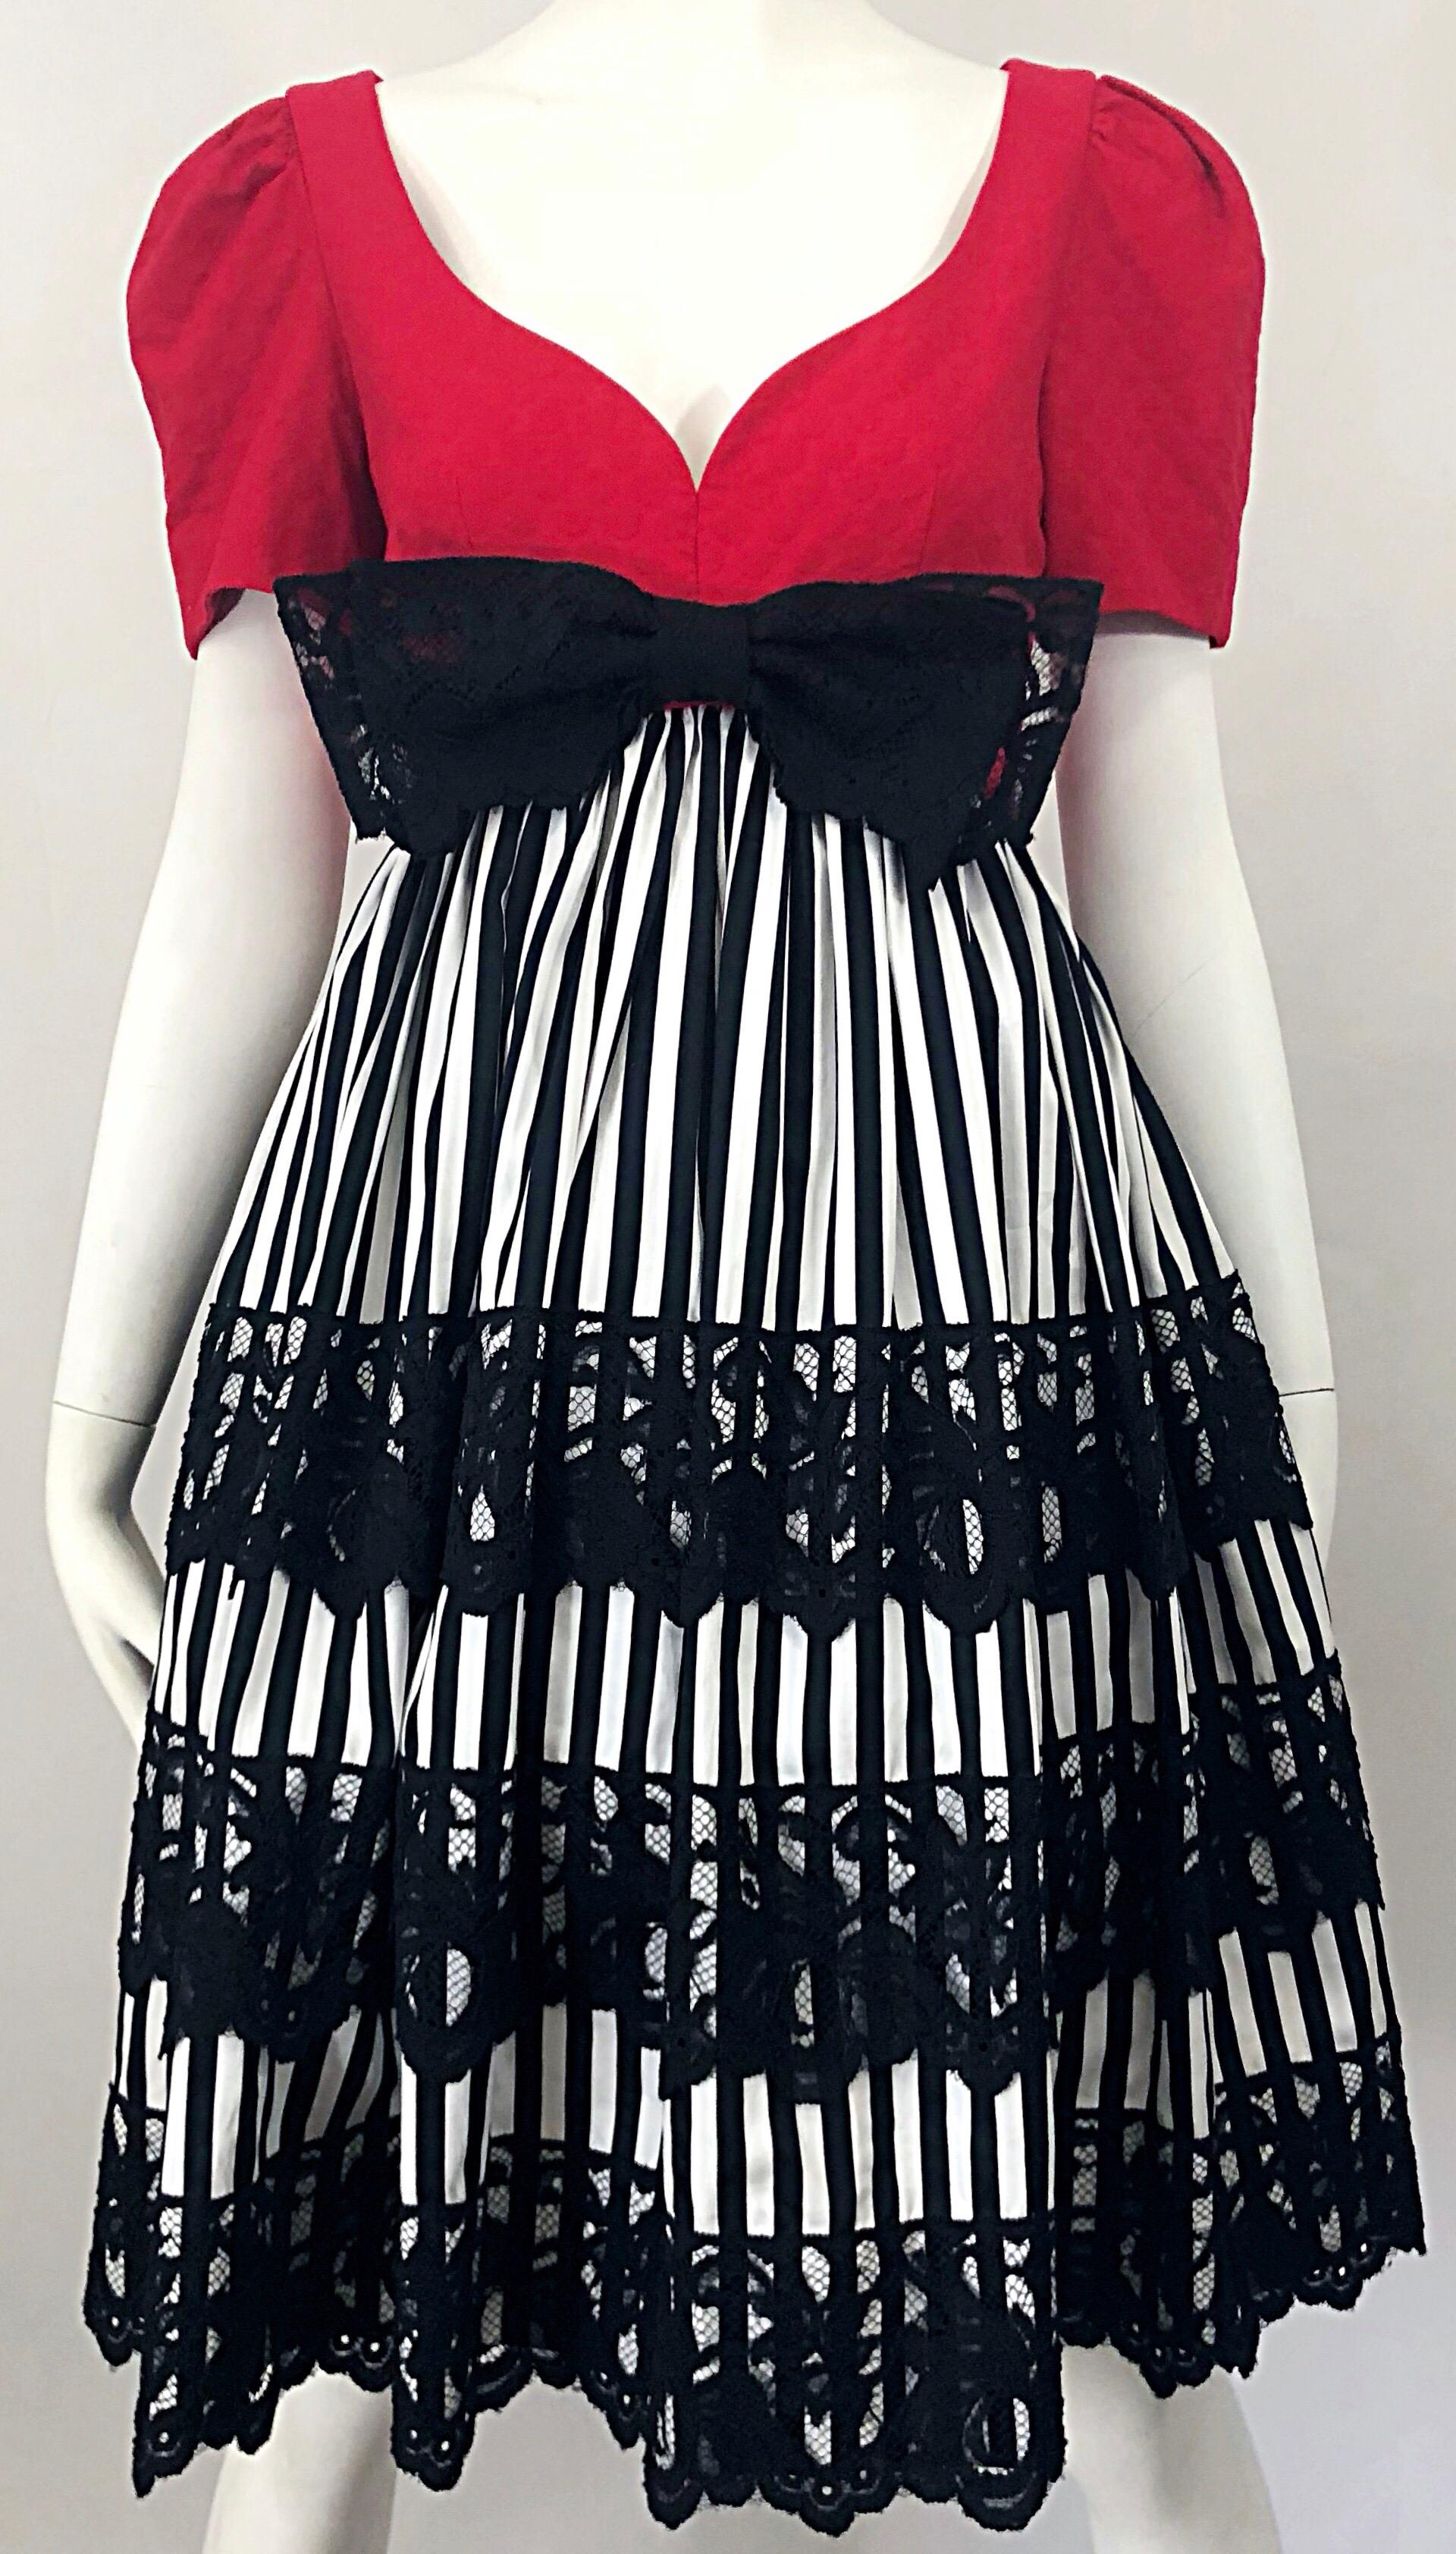 Vintage Adele Simpson 1980s Red Black White Fit n' Flare Empire Bow Lace Dress For Sale 2